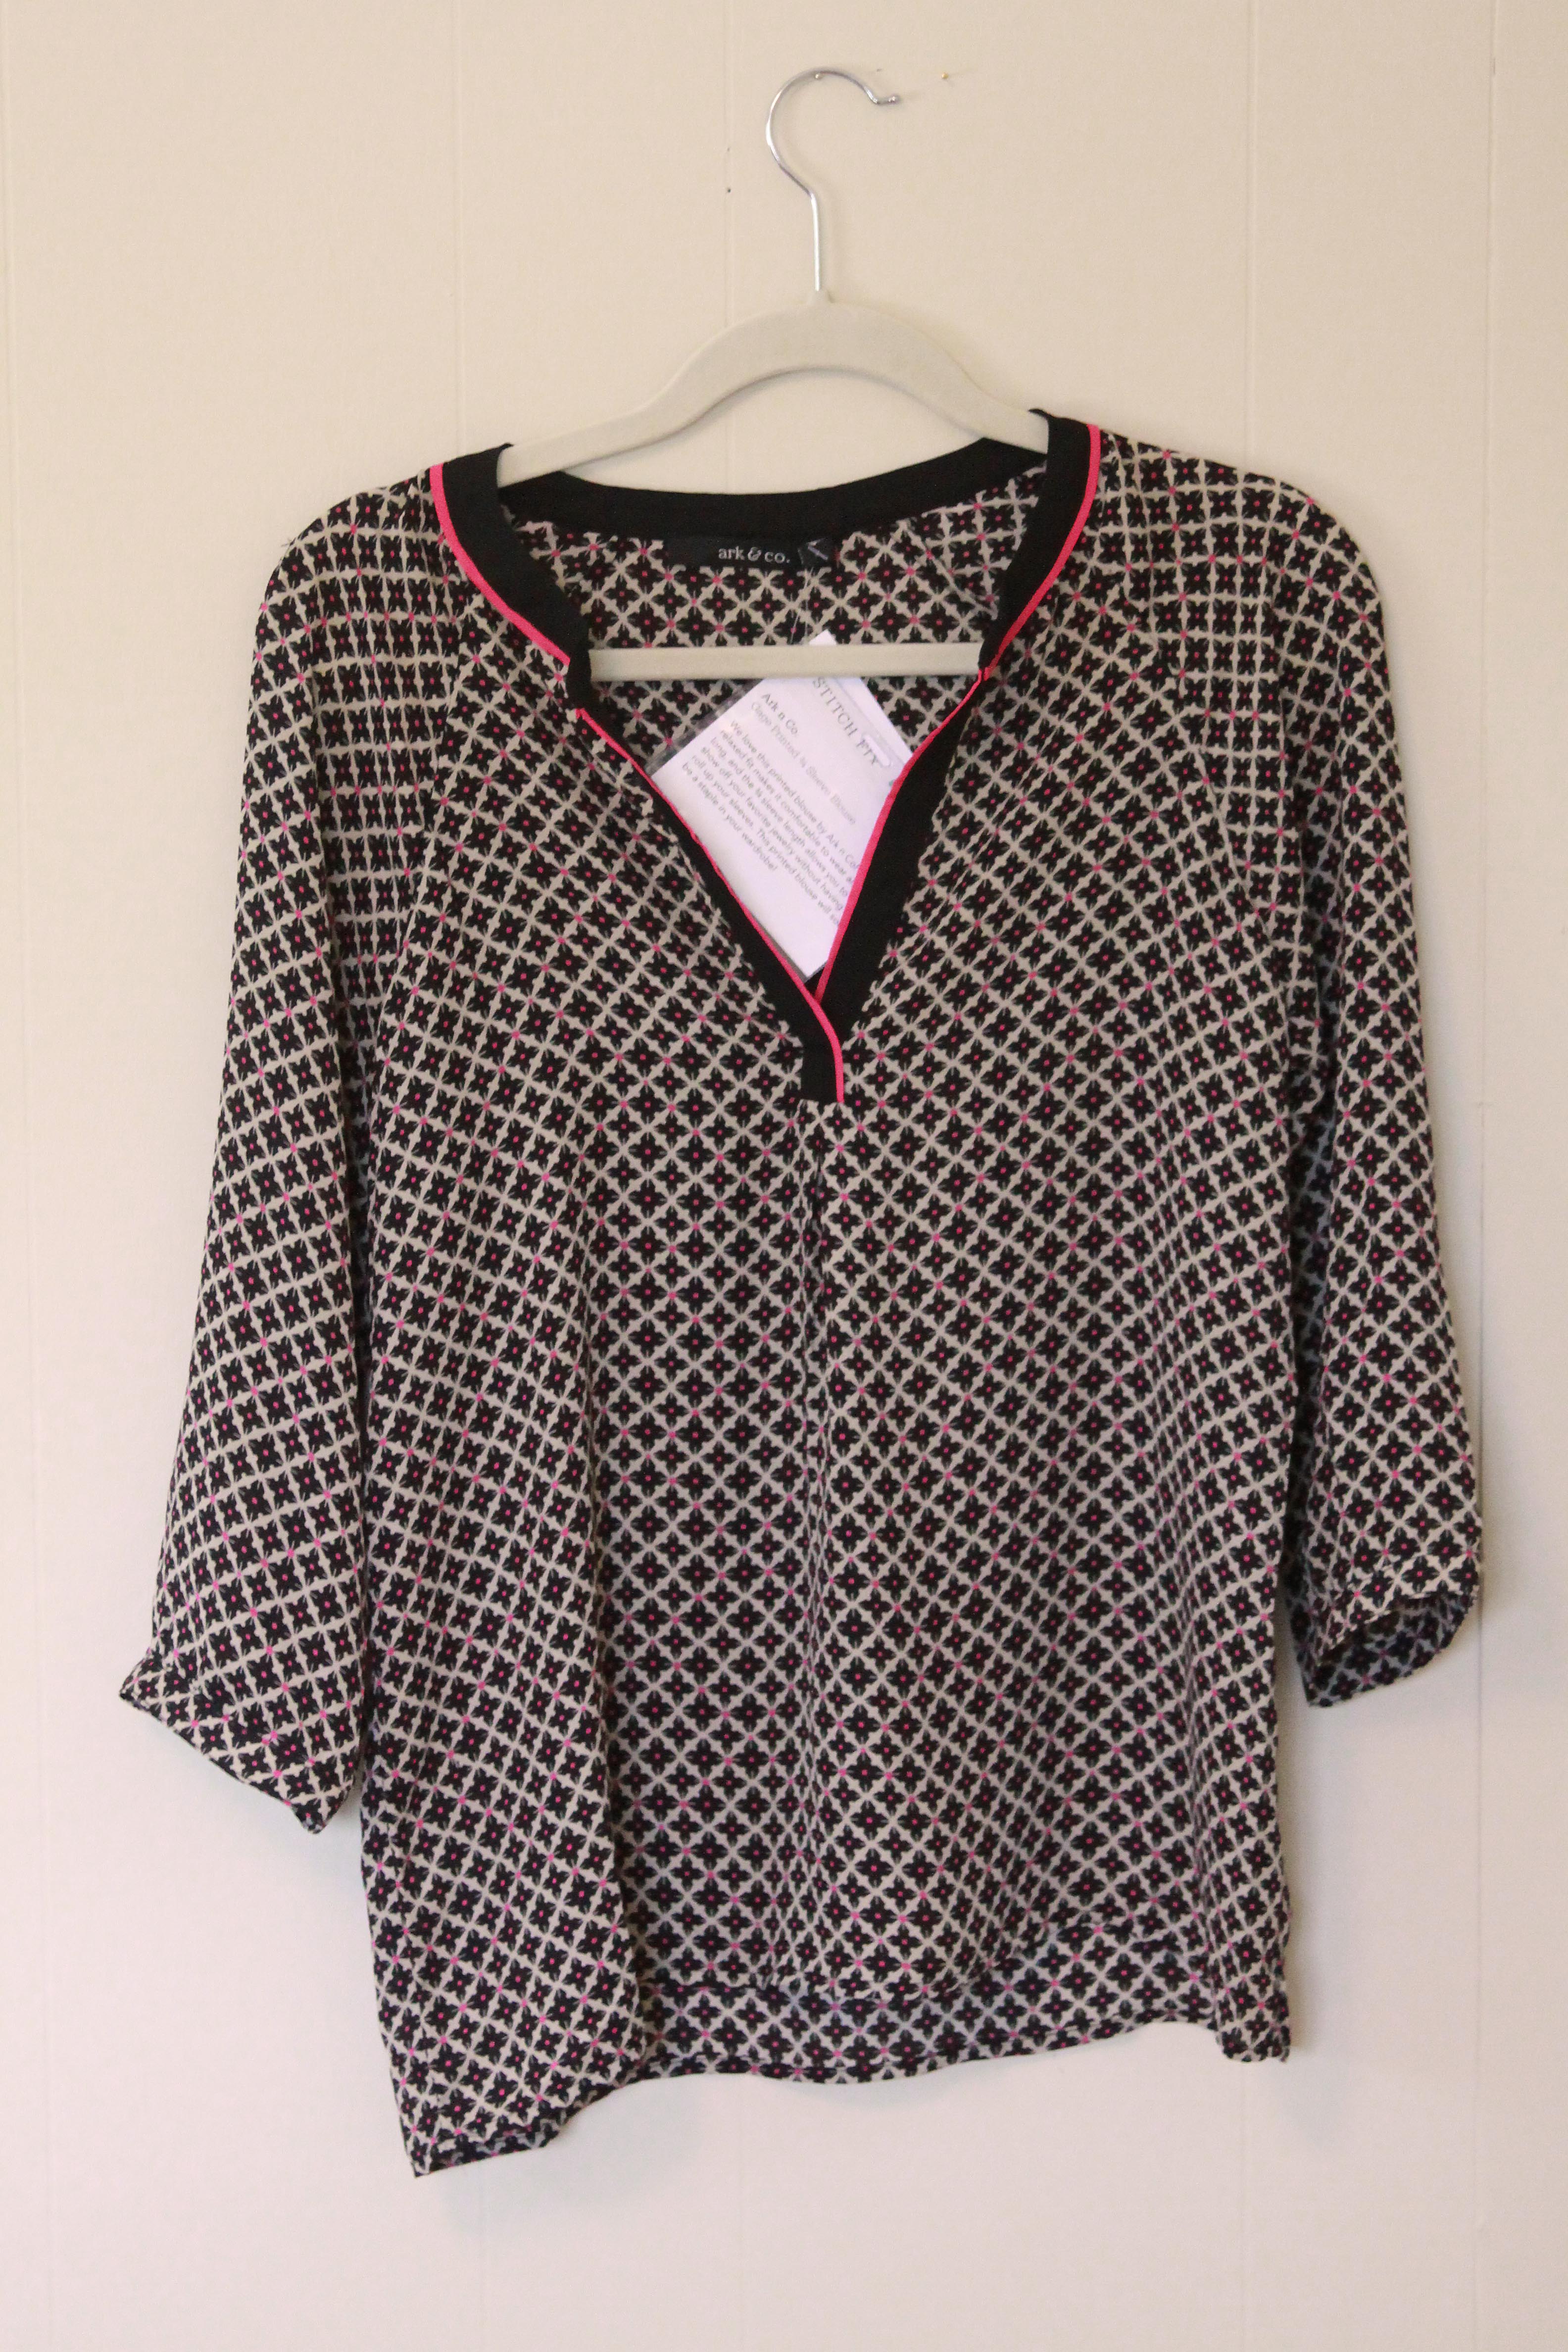 This Month’s Stitch Fix Review | Espresso and Cream